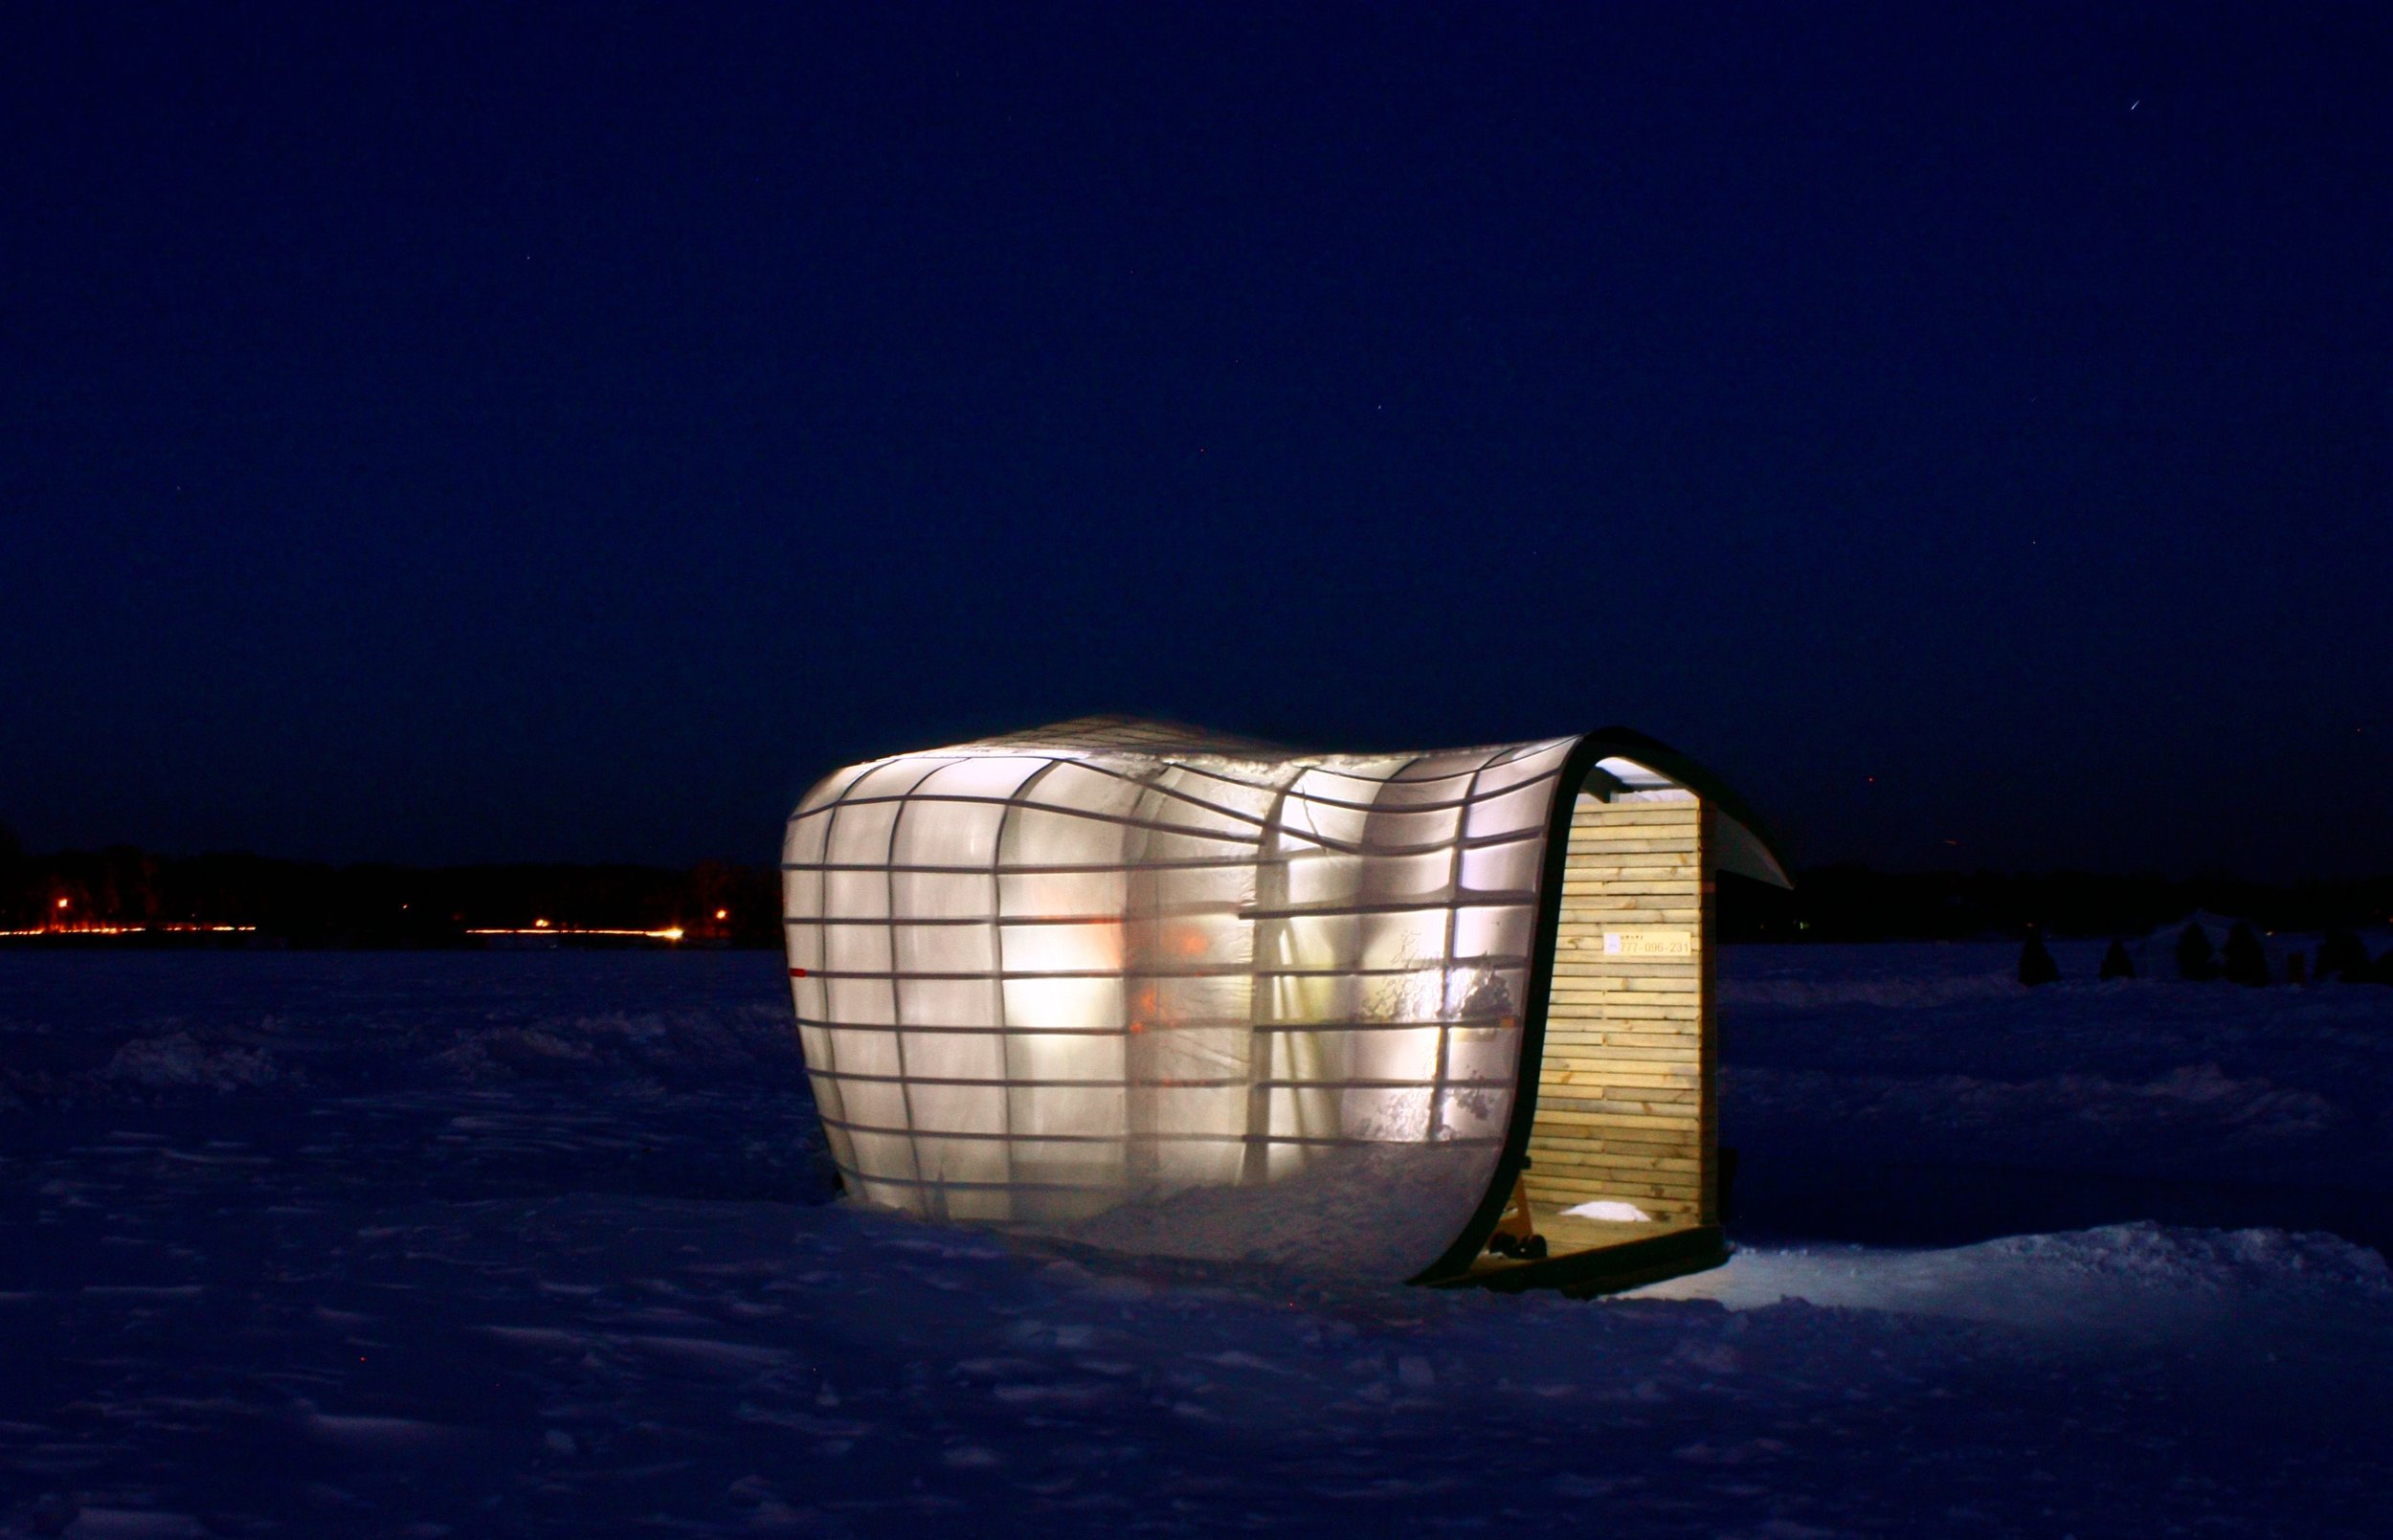 Nighttime exterior of lit-up art shanty designed by NewStudio Architecture